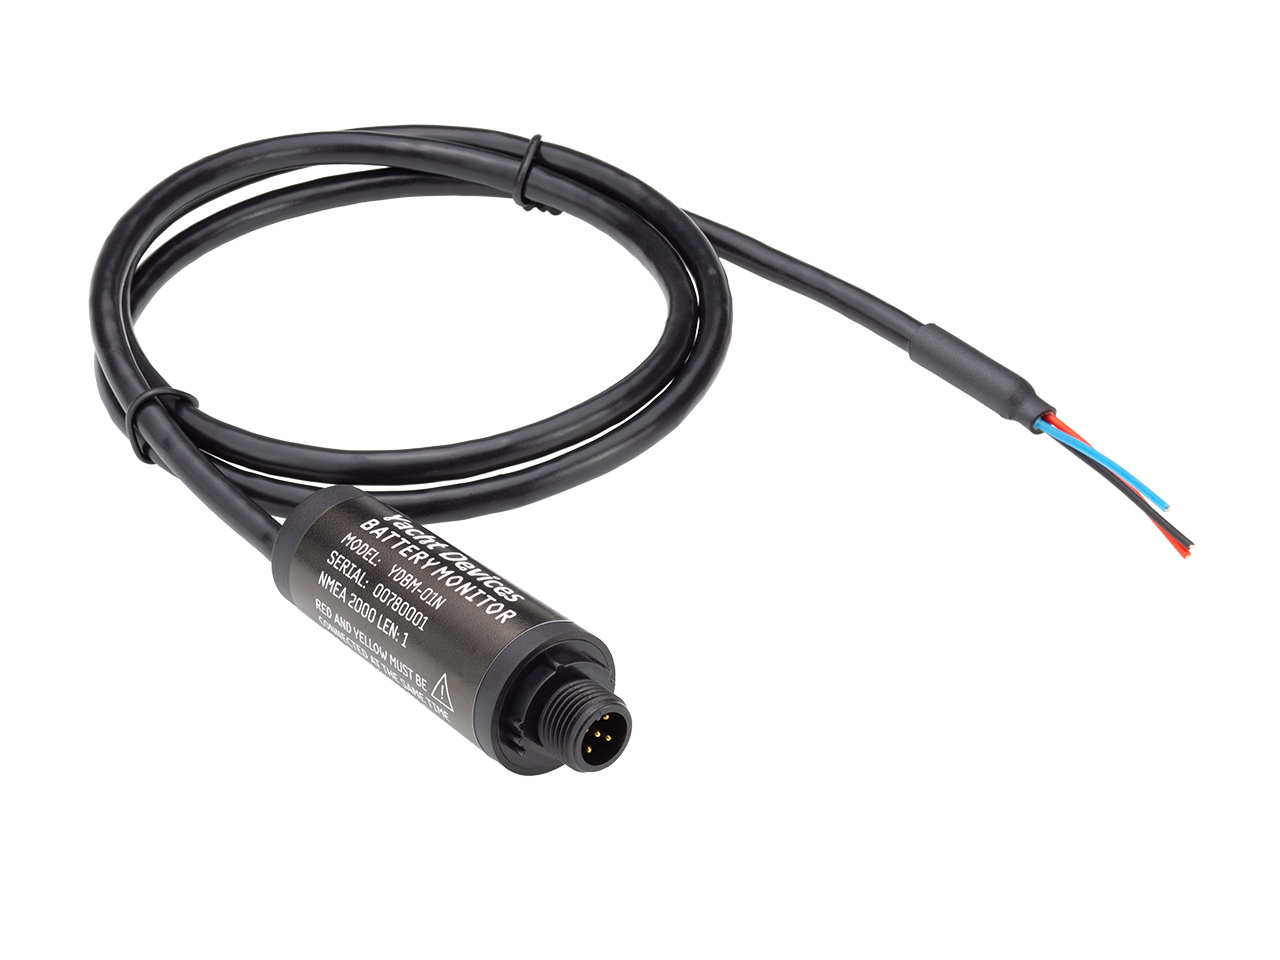 YDBM-01N model, with NMEA 2000 Micro Male connector